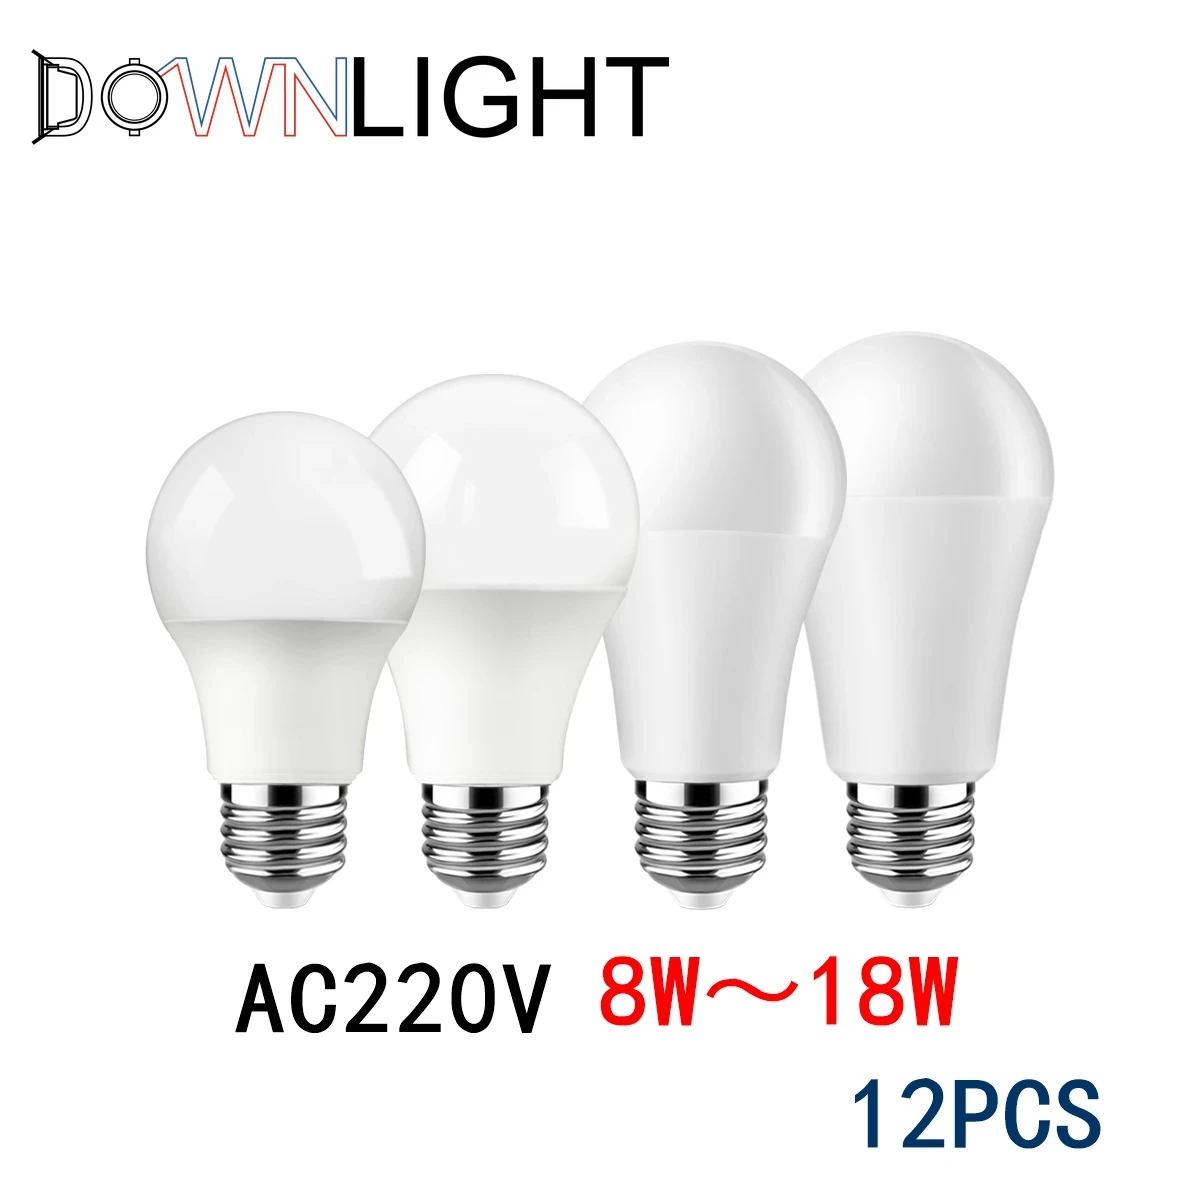 12PC Led bulb Lamp AC 220V-240V Light Bulb A60 8W-18W B22 E27 superbright led bulb lighting Suitable for kitchen and living room